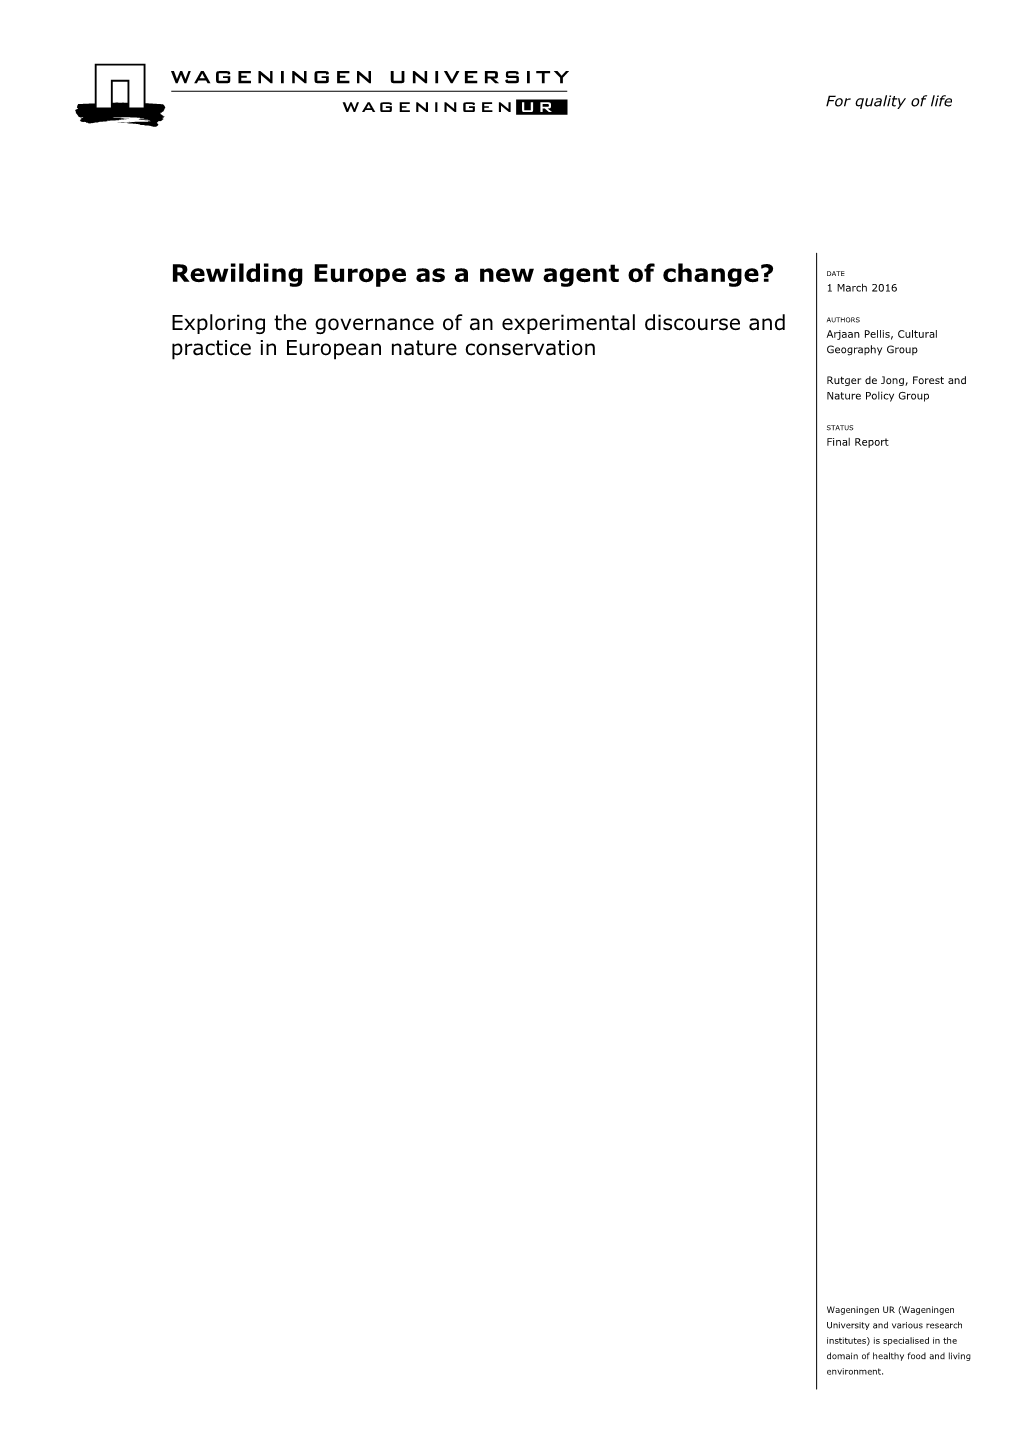 Rewilding Europe As a New Agent of Change? DATE 1 March 2016